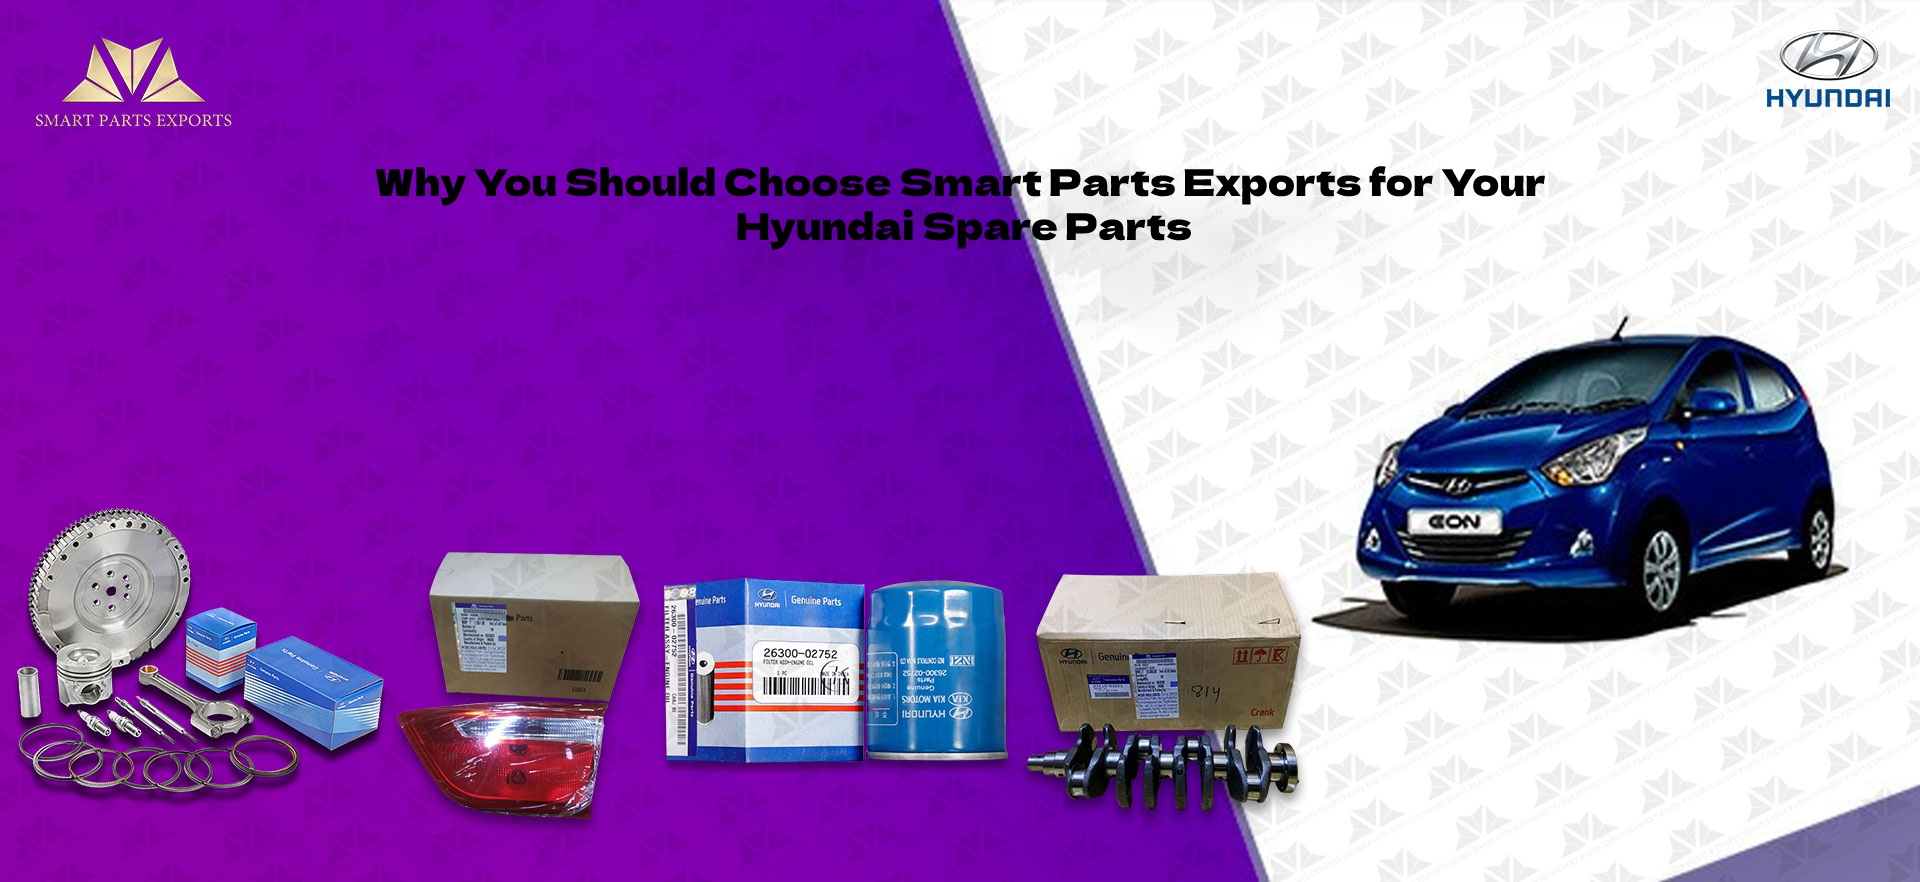 Why You Should Choose Smart Parts Exports for Your Hyundai Spare Parts